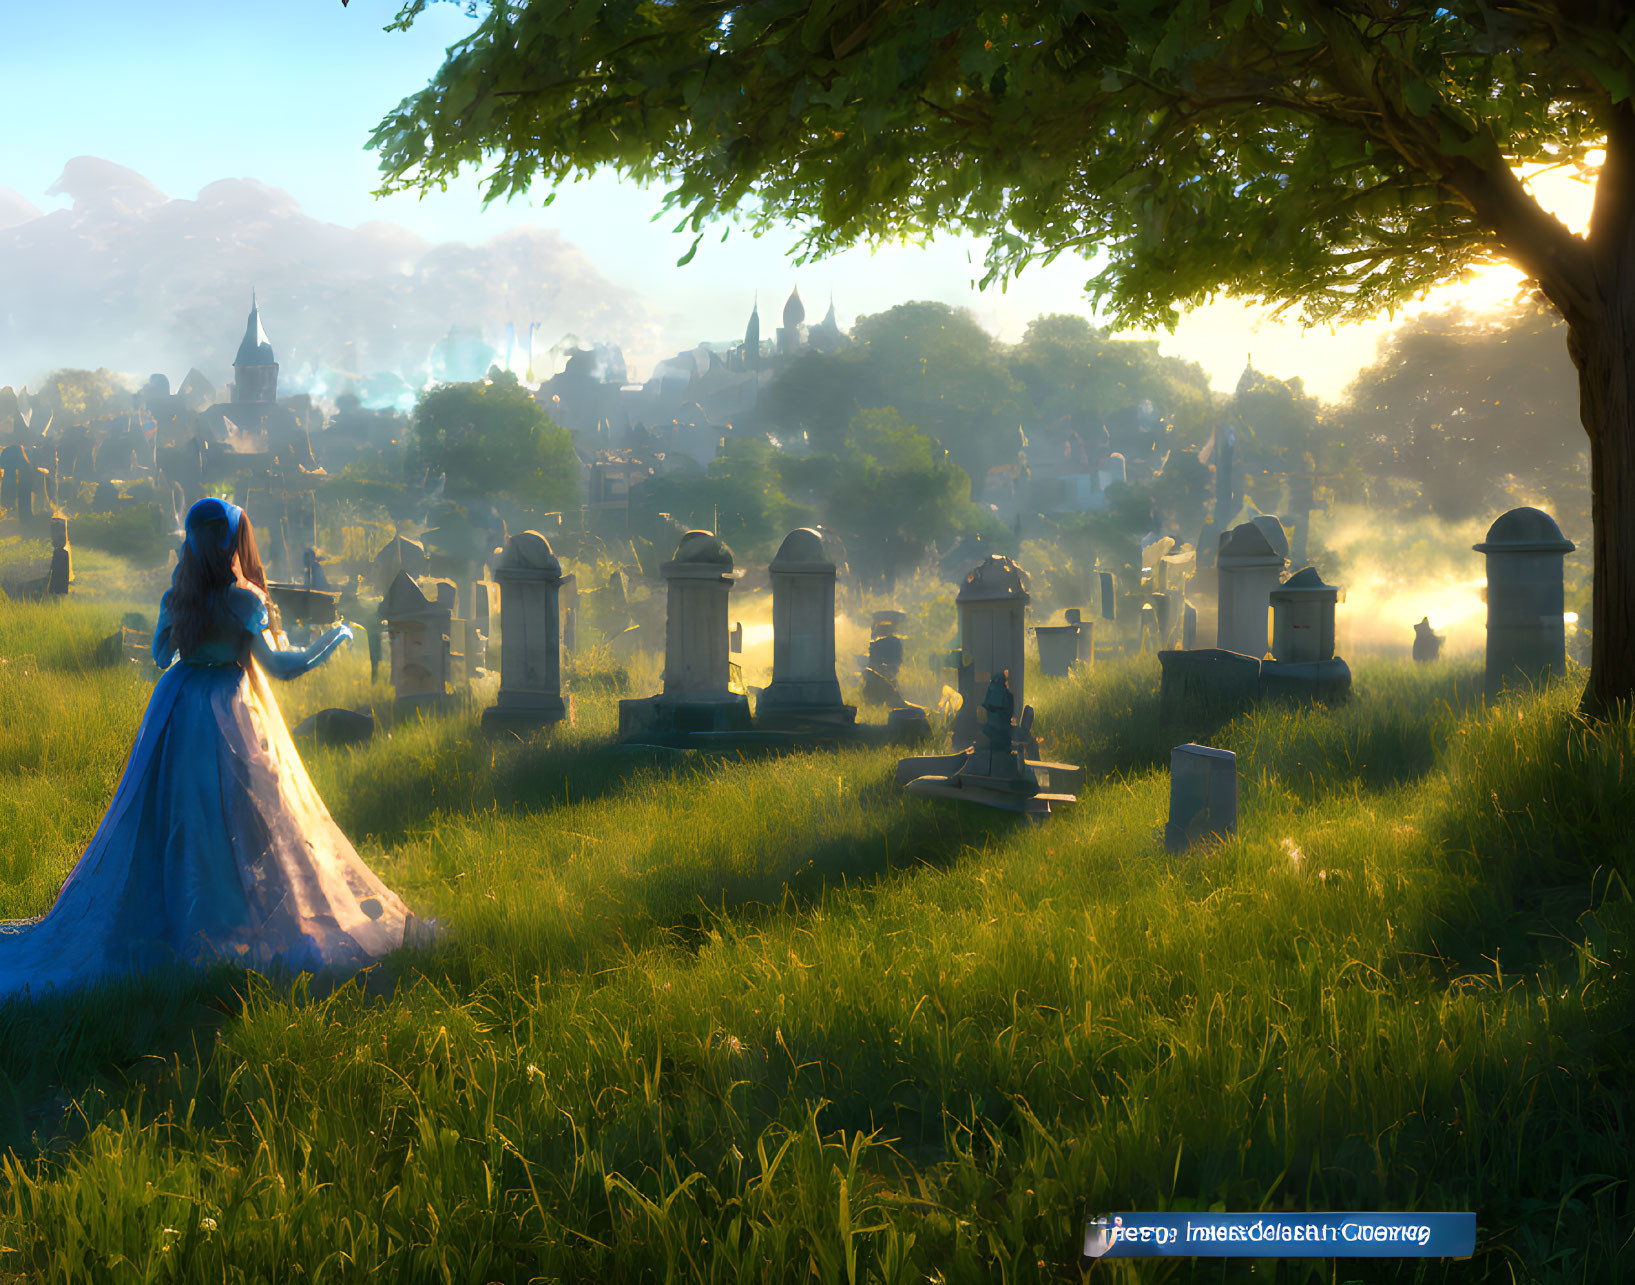 Woman in Blue Gown Stands in Sunlit Cemetery